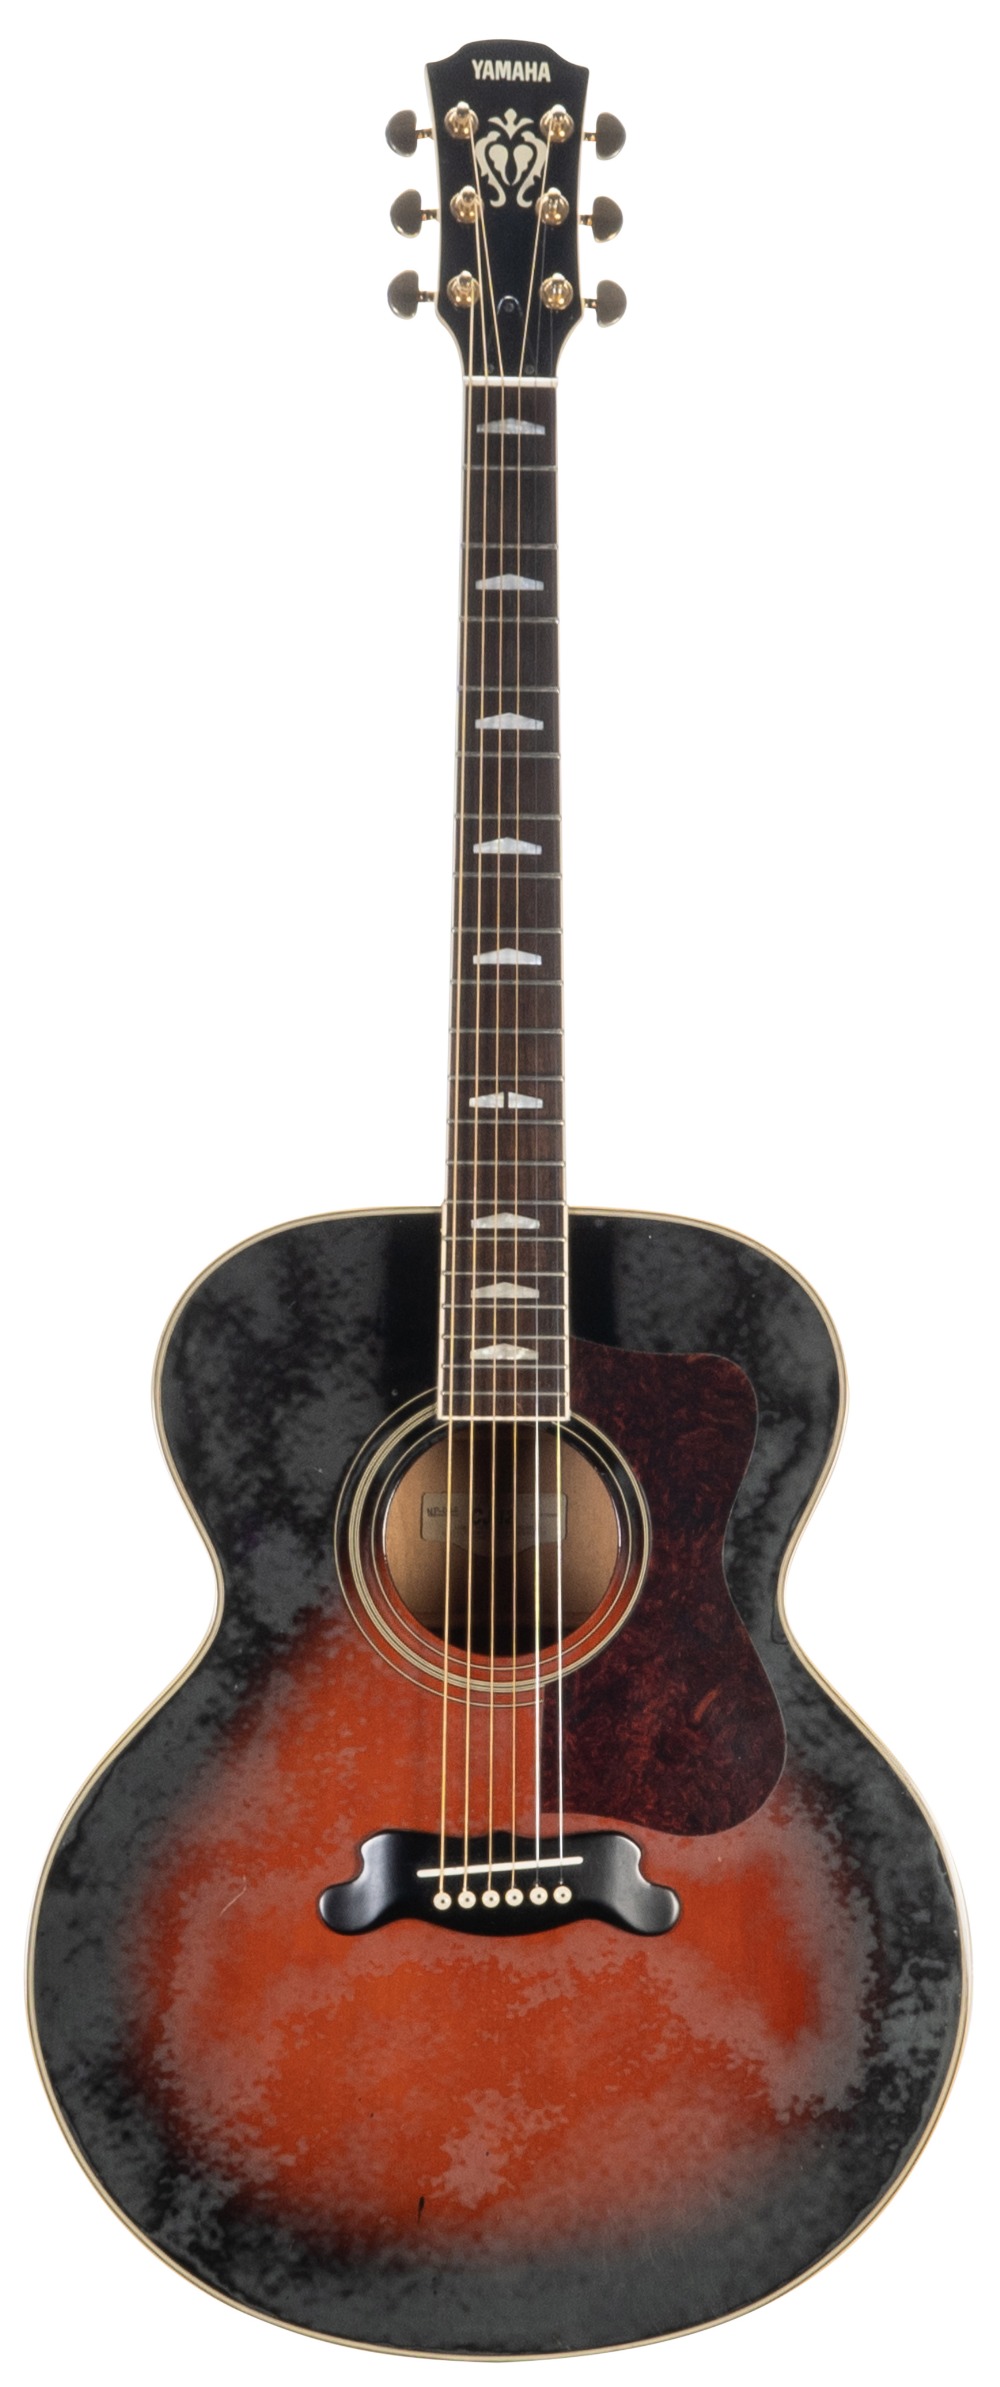 Yamaha CJ-12 acoustic guitar; Finish: two-tone sunburst, heavy clouding to the lacquer, various